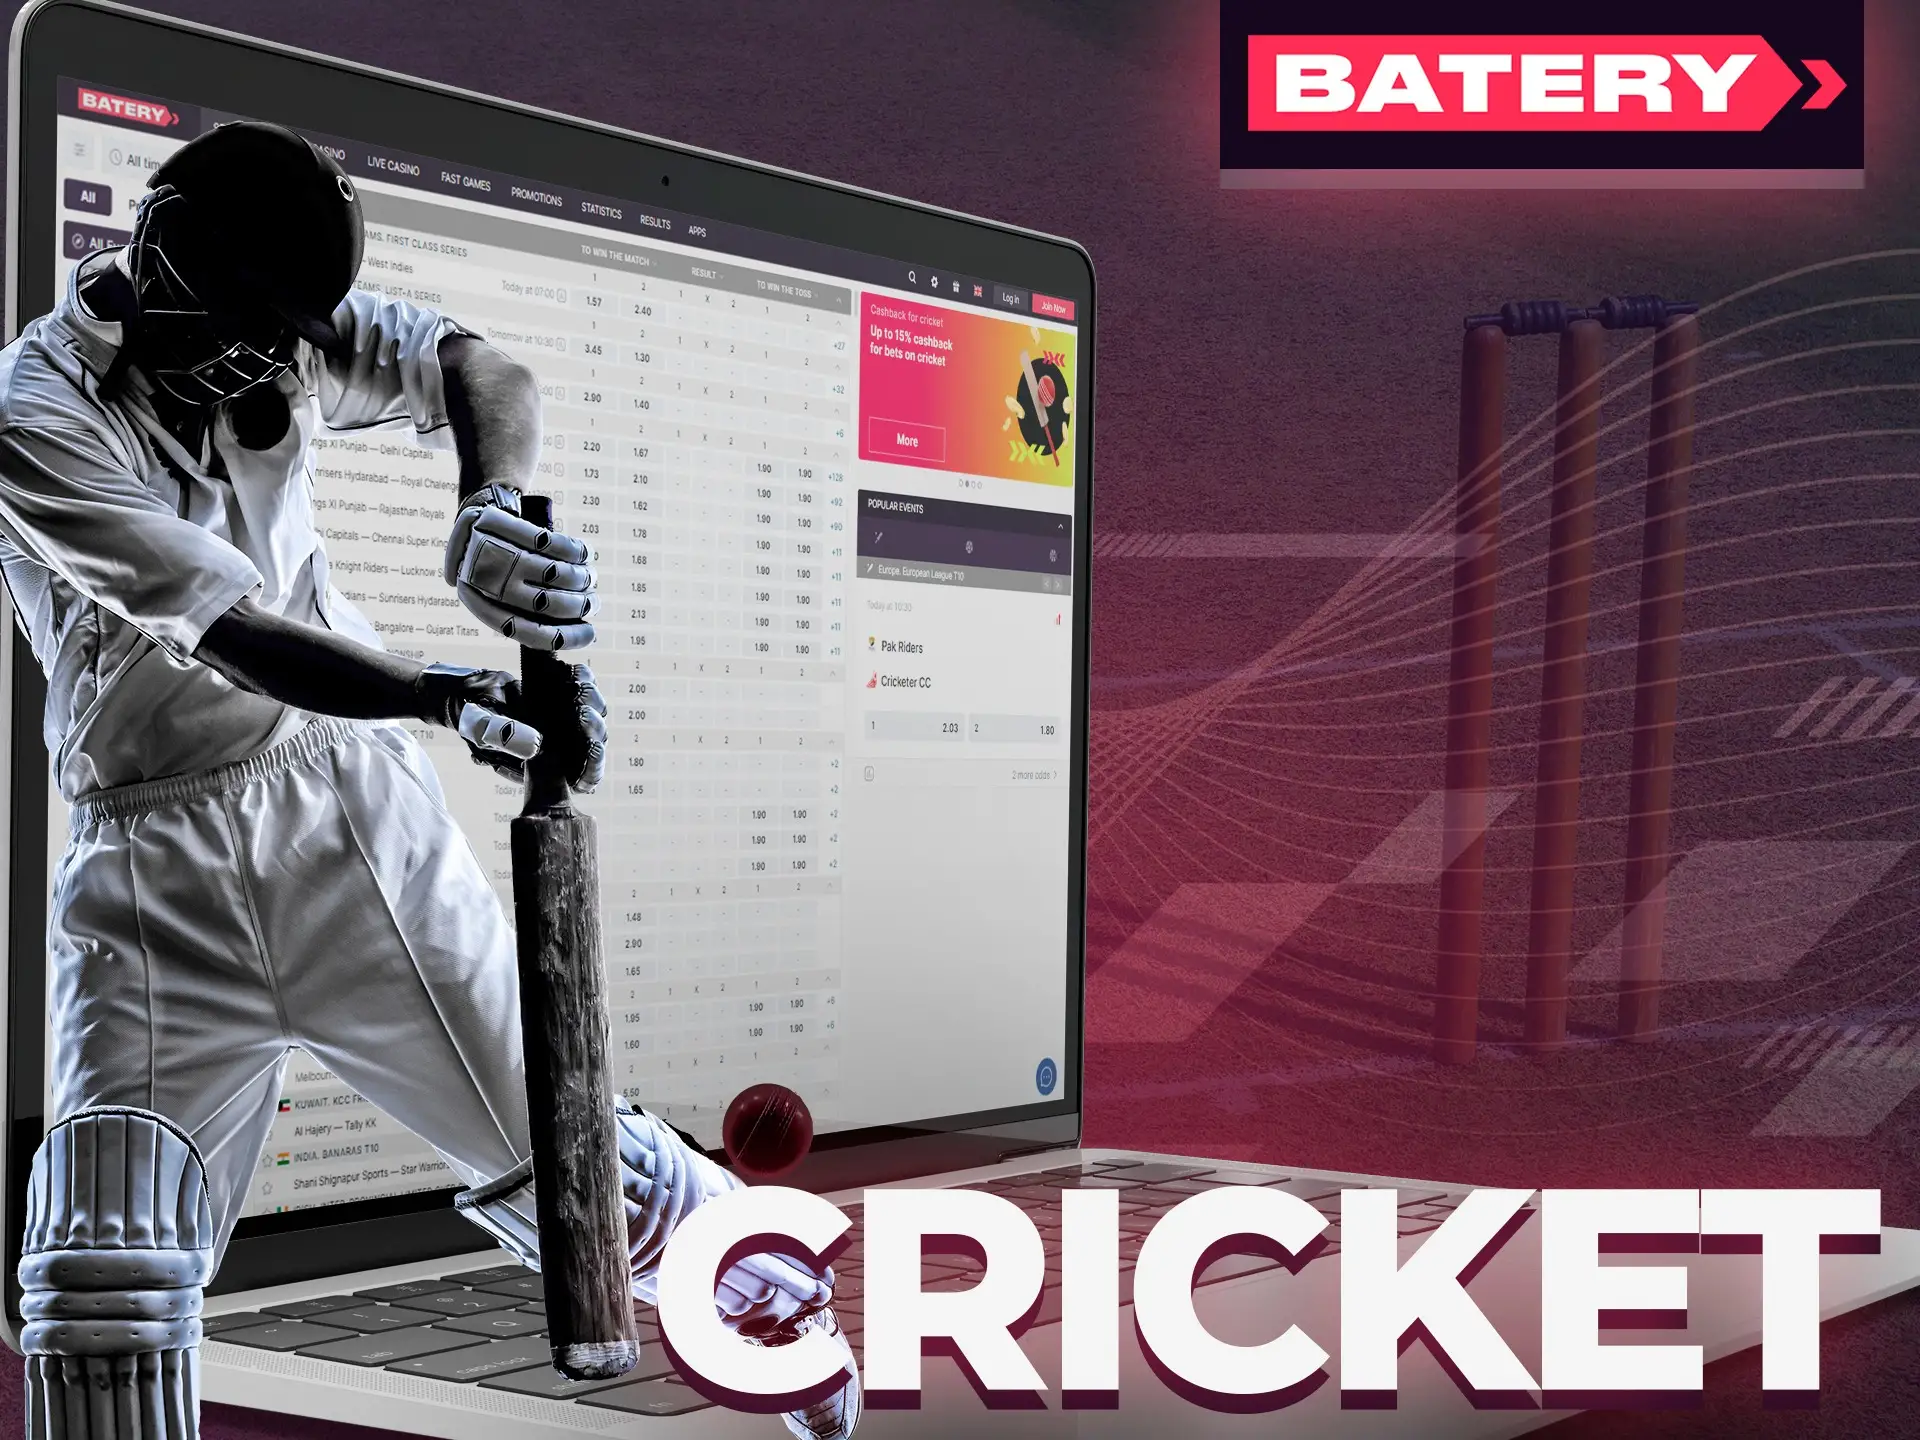 Bet on best cricket teams and wait for your winnings at Batery.